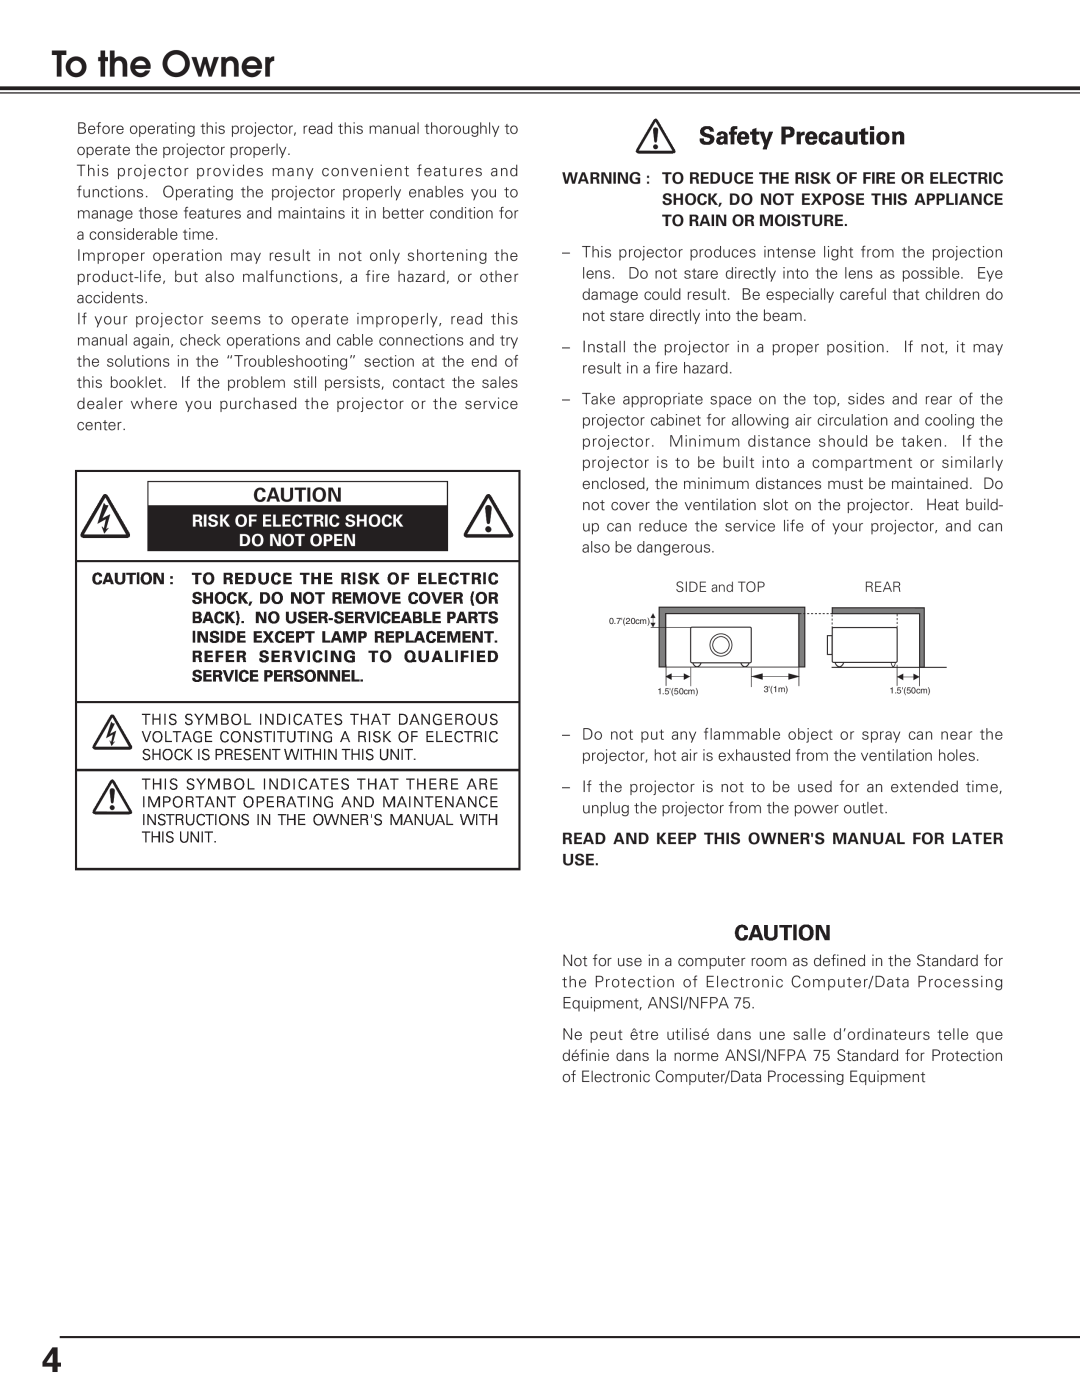 Eiki LC-SD12 owner manual To the Owner, Safety Precaution, Risk Of Electric Shock Do Not Open 